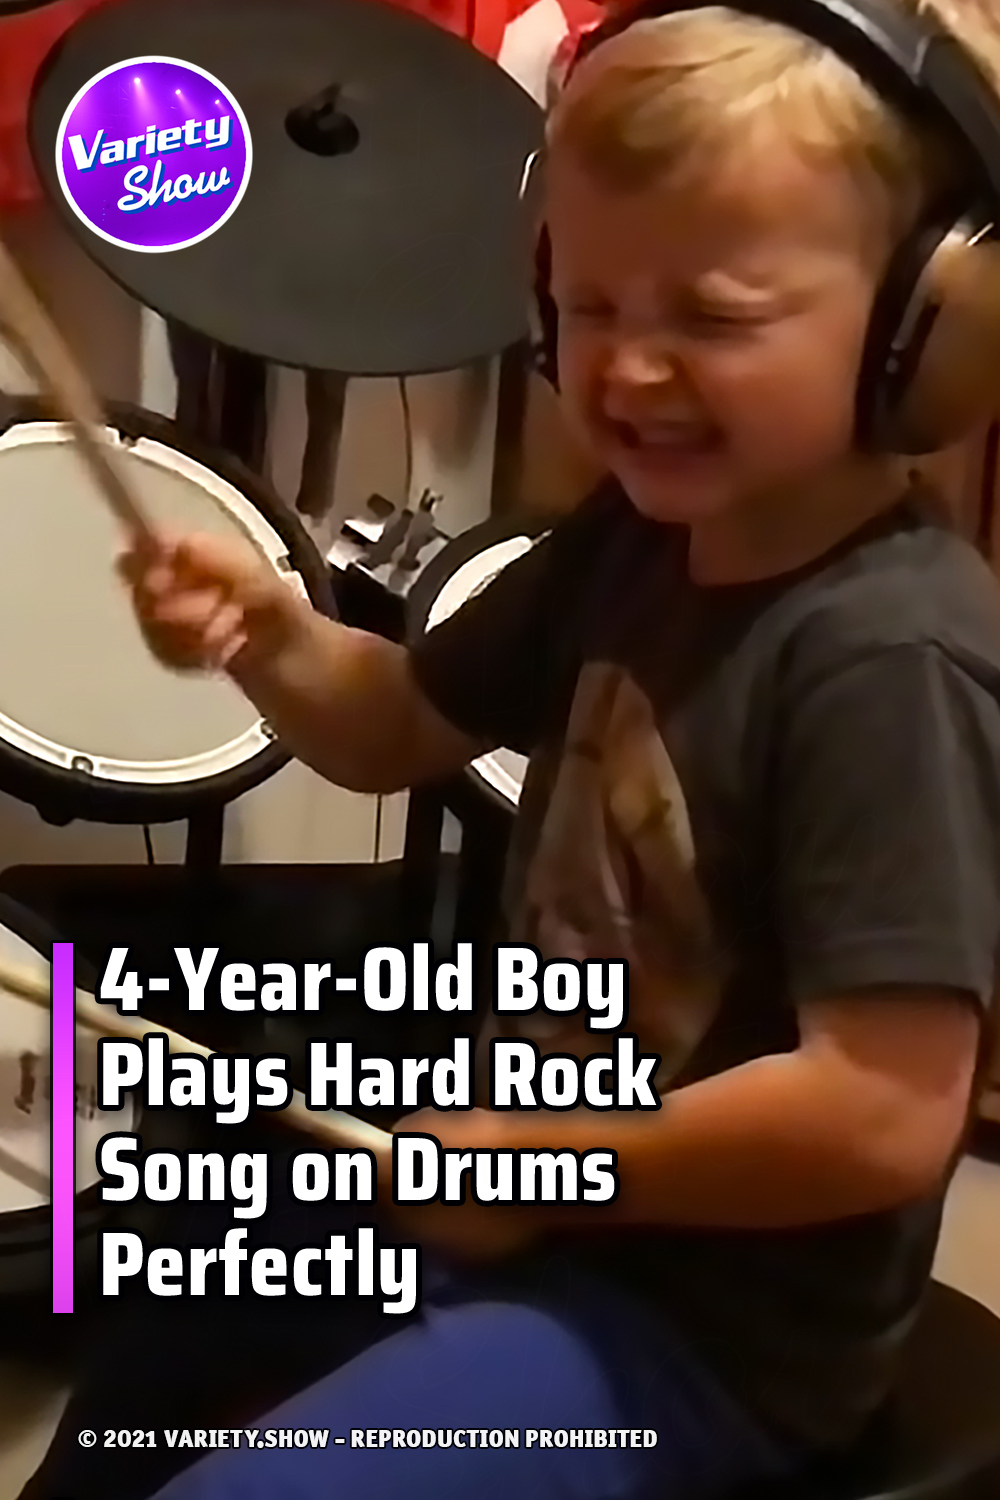 4-Year-Old Boy Plays Hard Rock Song on Drums Perfectly